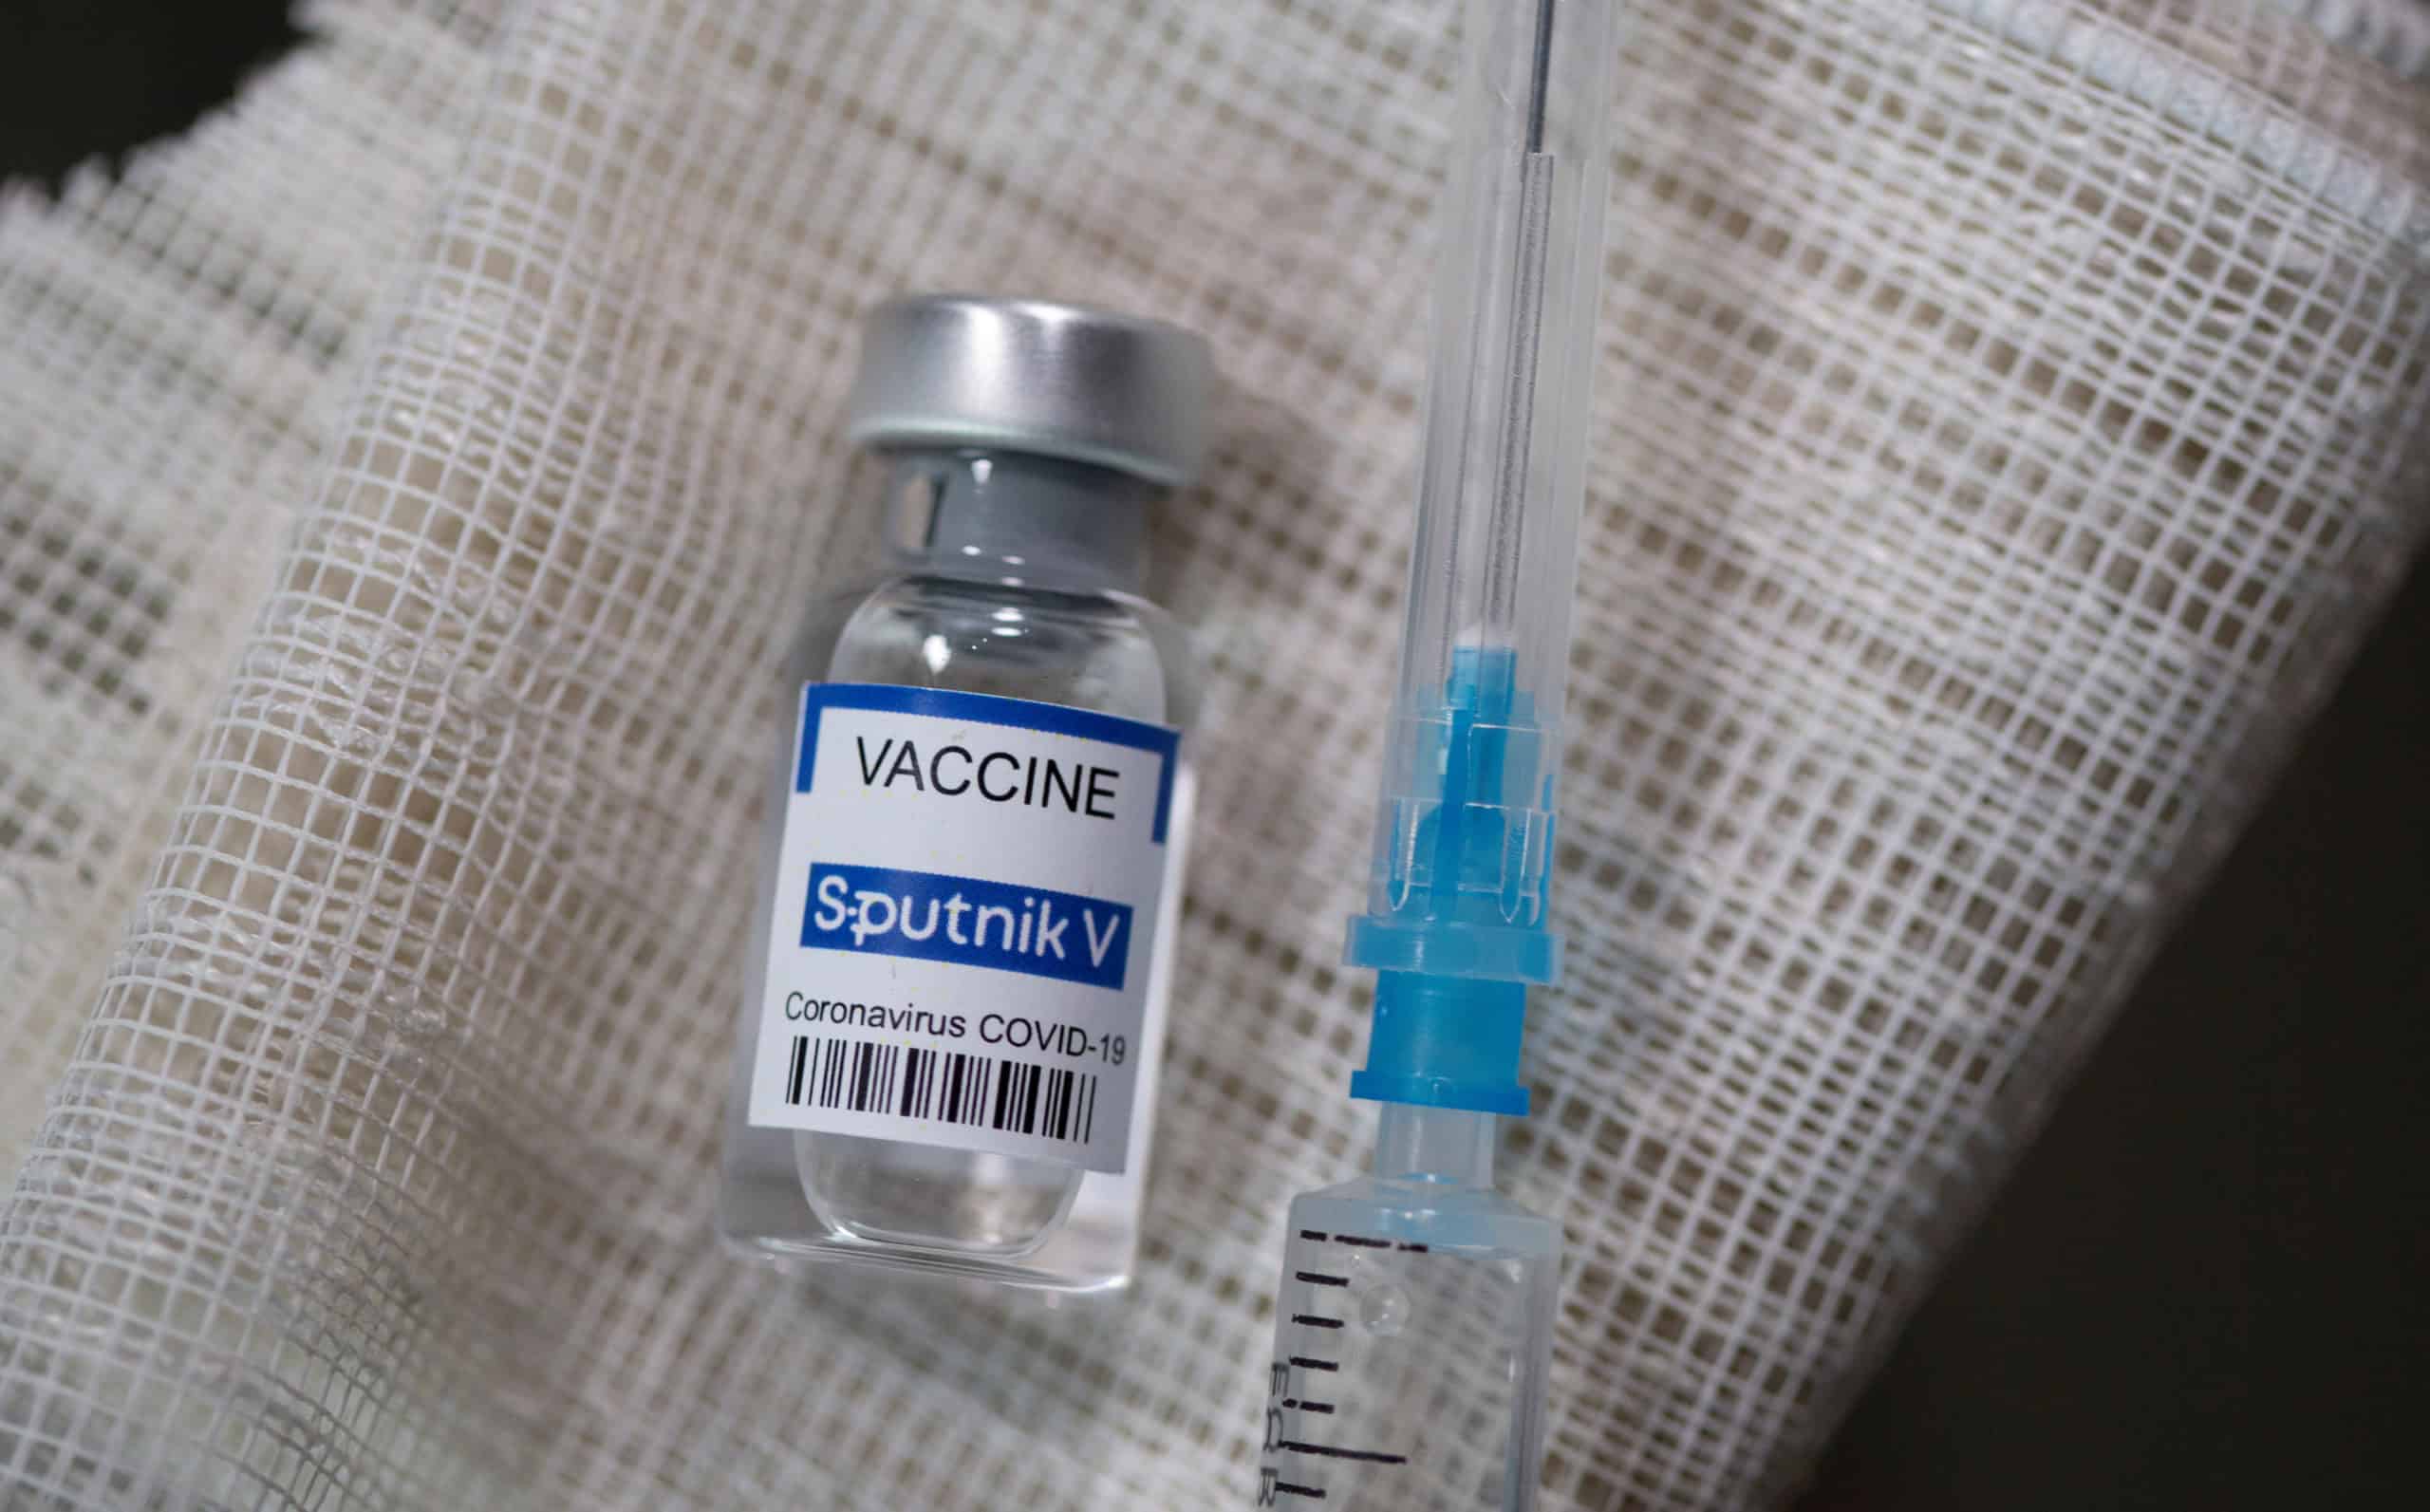 Brazil’s health authority rejected importing Russia’s Sputnik V vaccine.